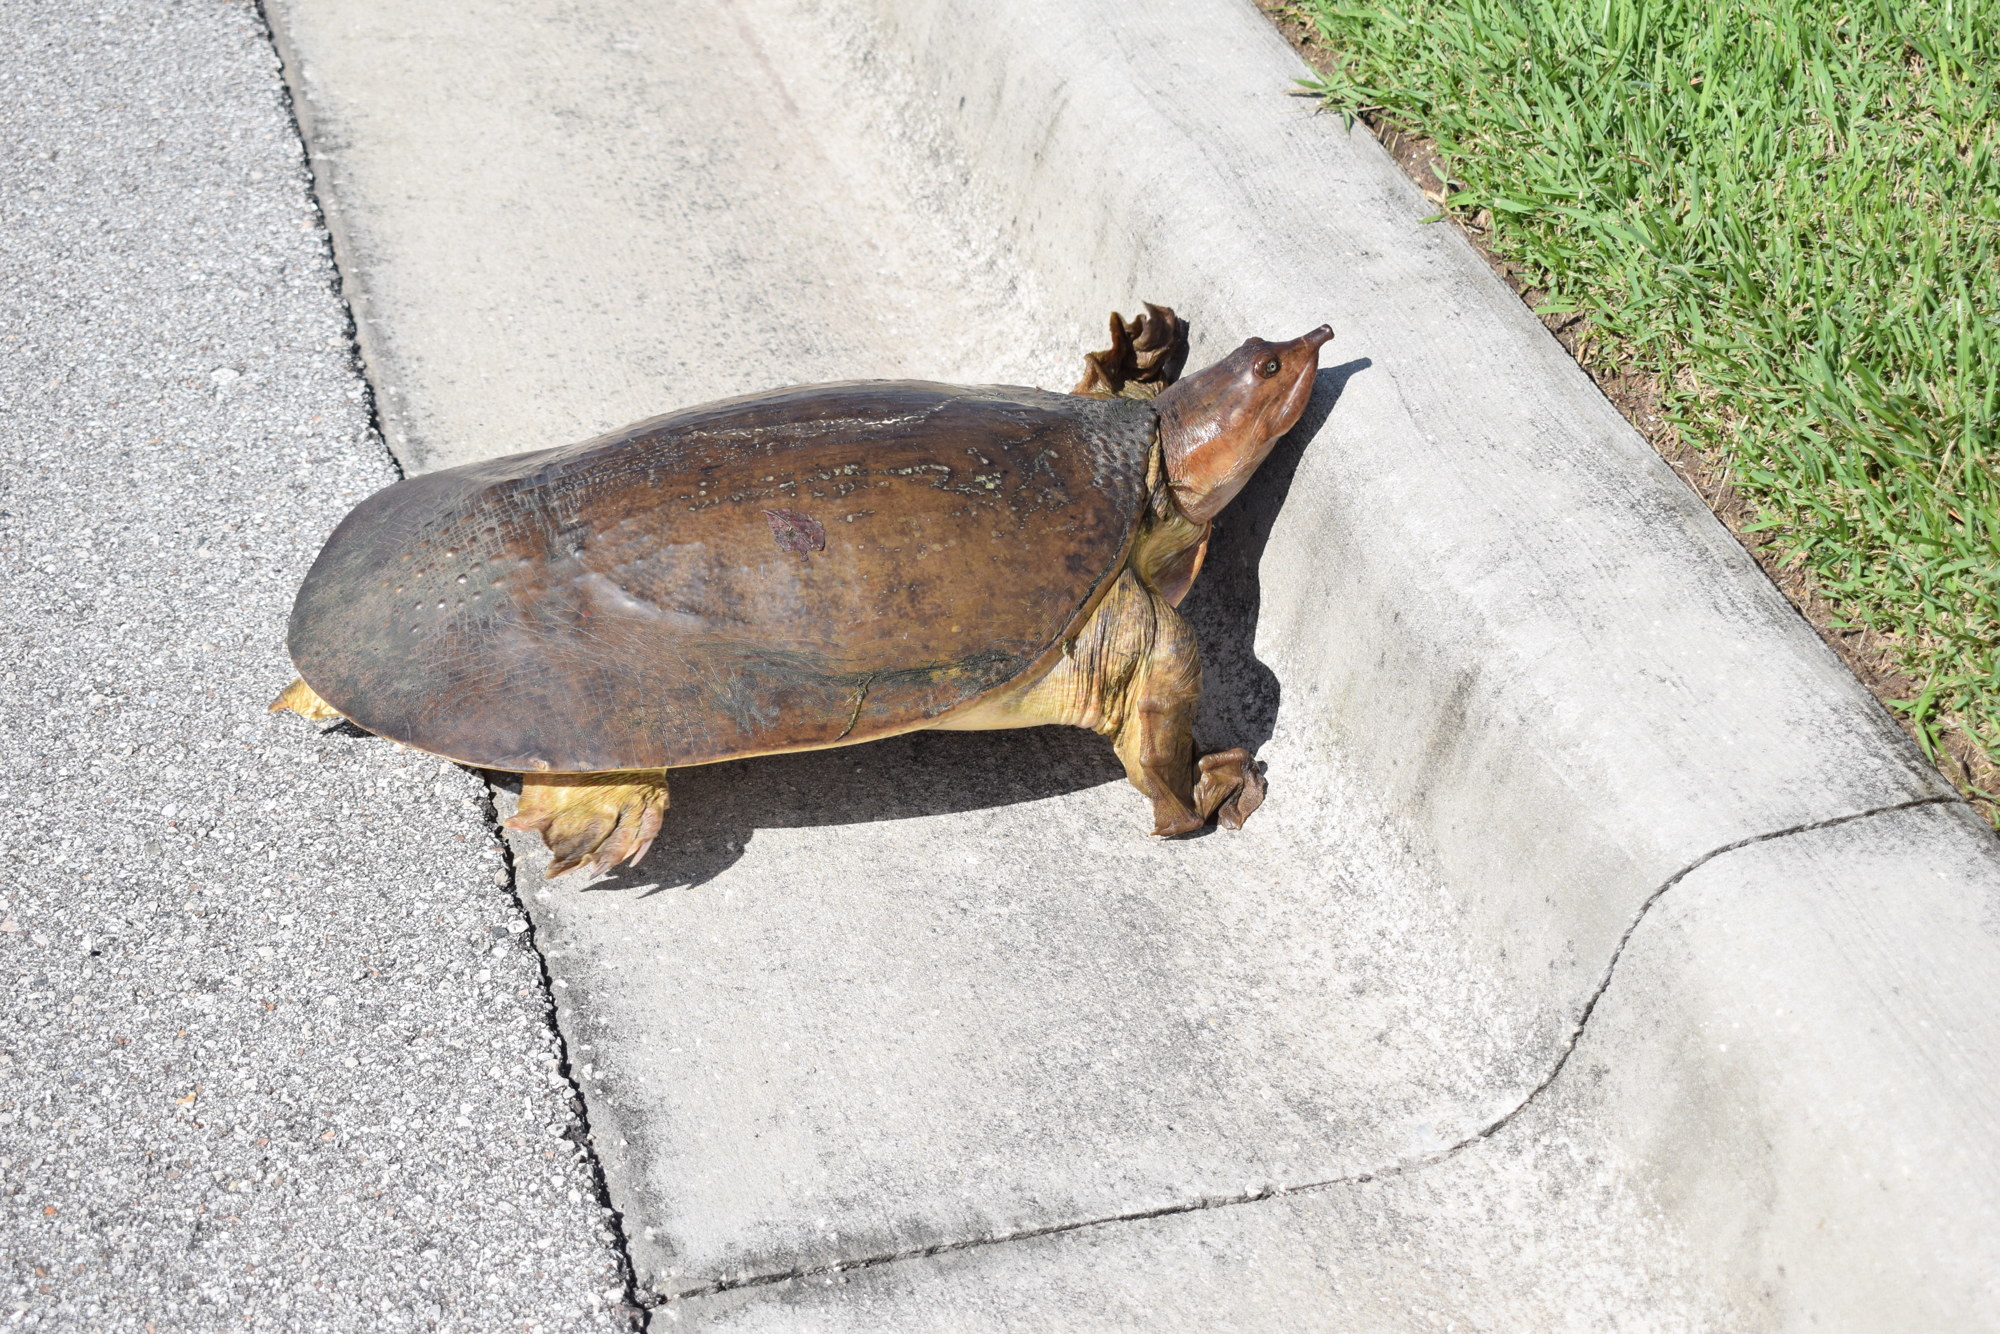 The rather high curb was the last obstacle between the turtle and grass that led to a lake.